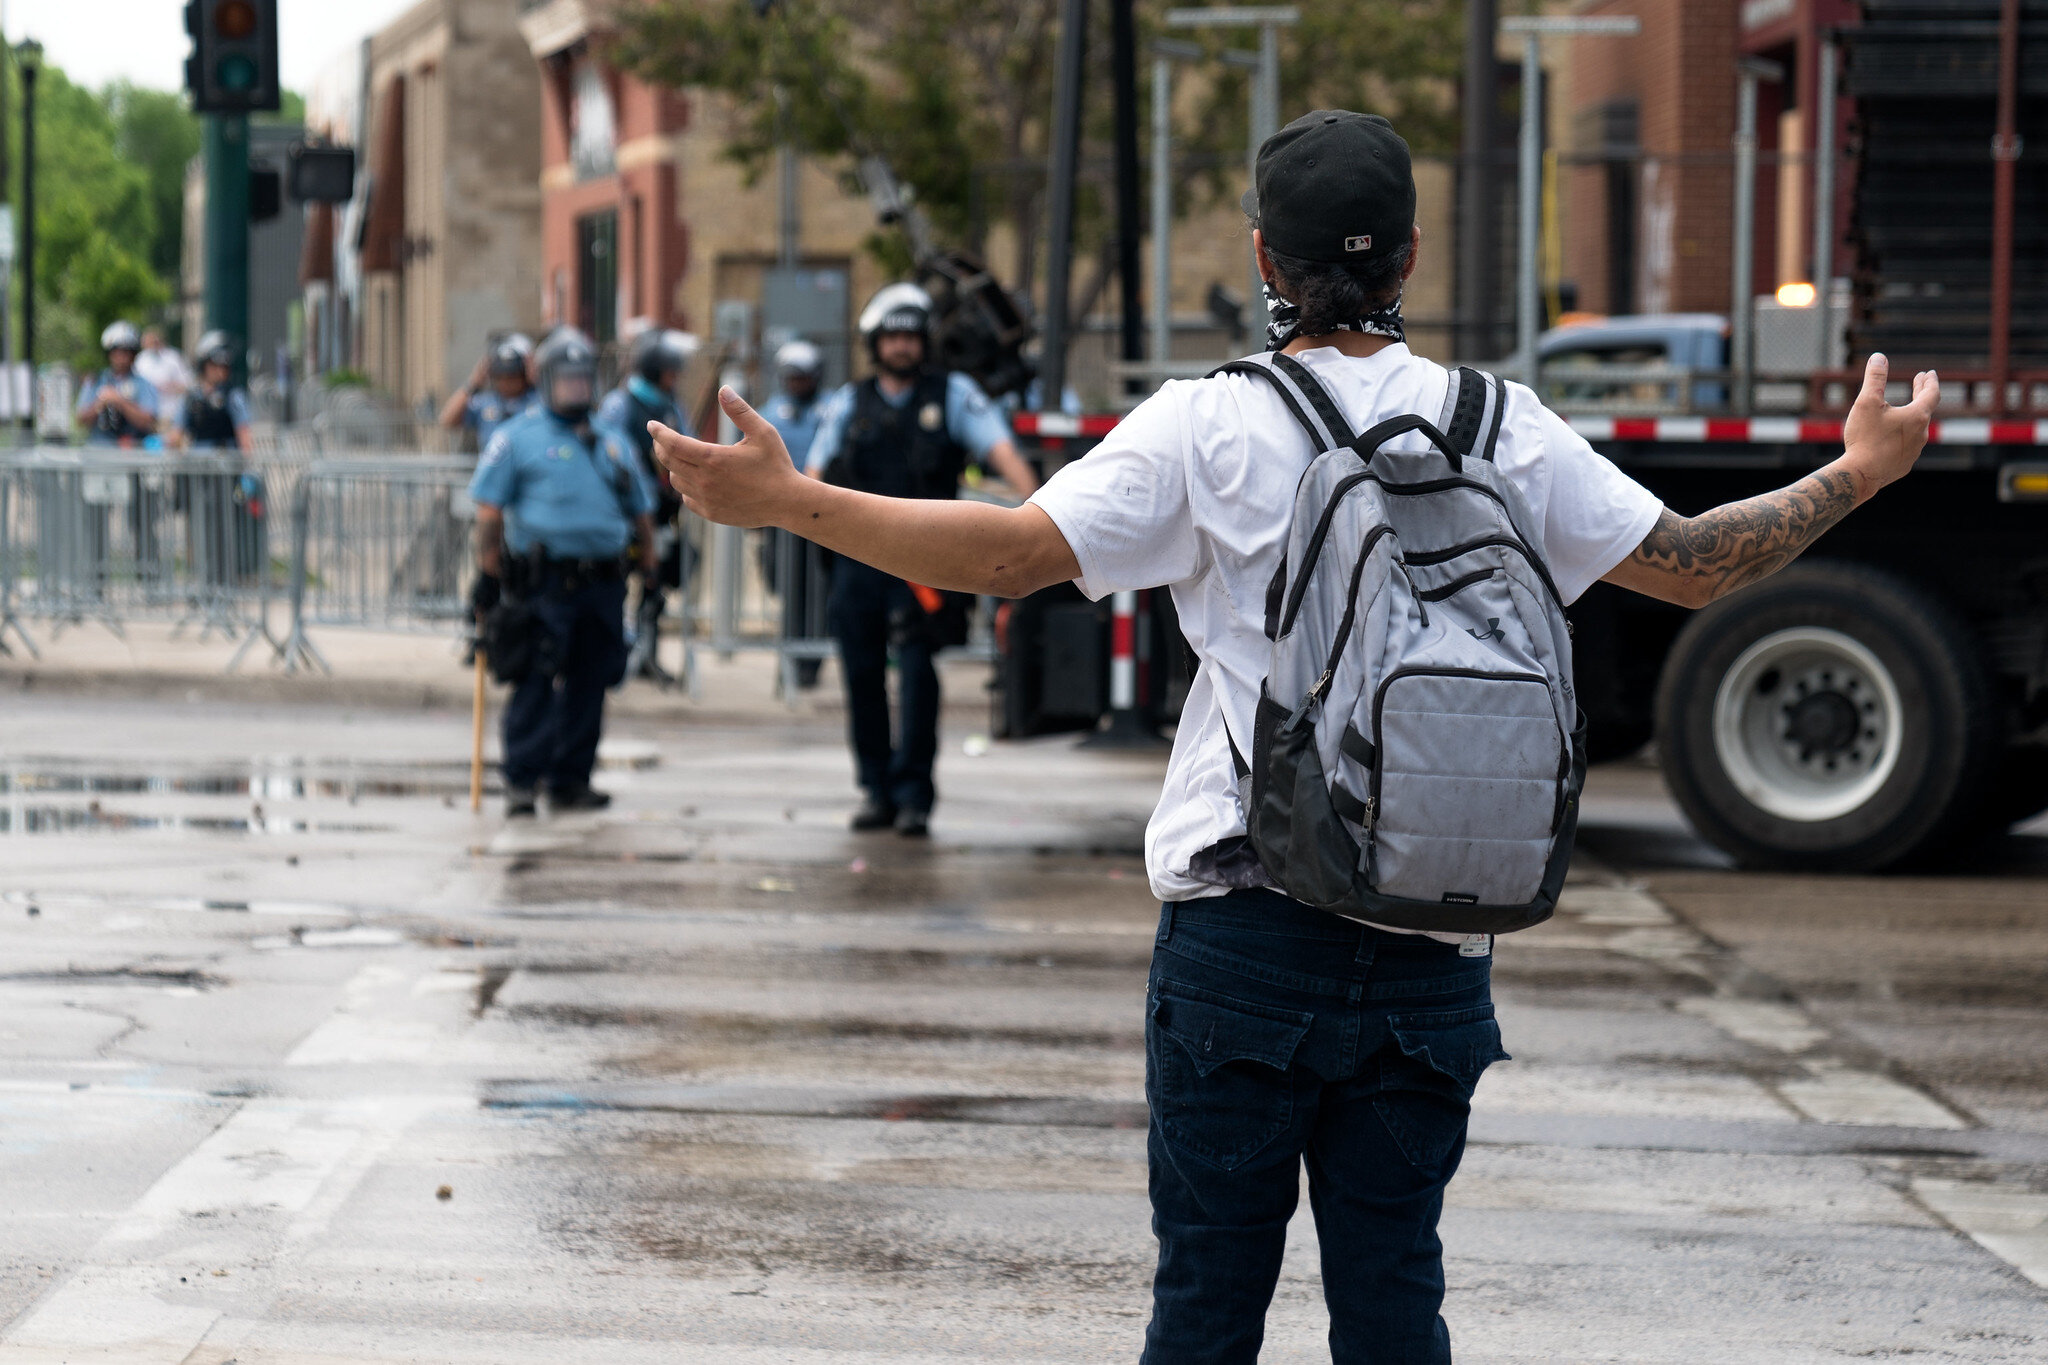  A protester confronts police officers on Thursday morning outside the 3rd Police Precinct in Minneapolis, Minnesota 